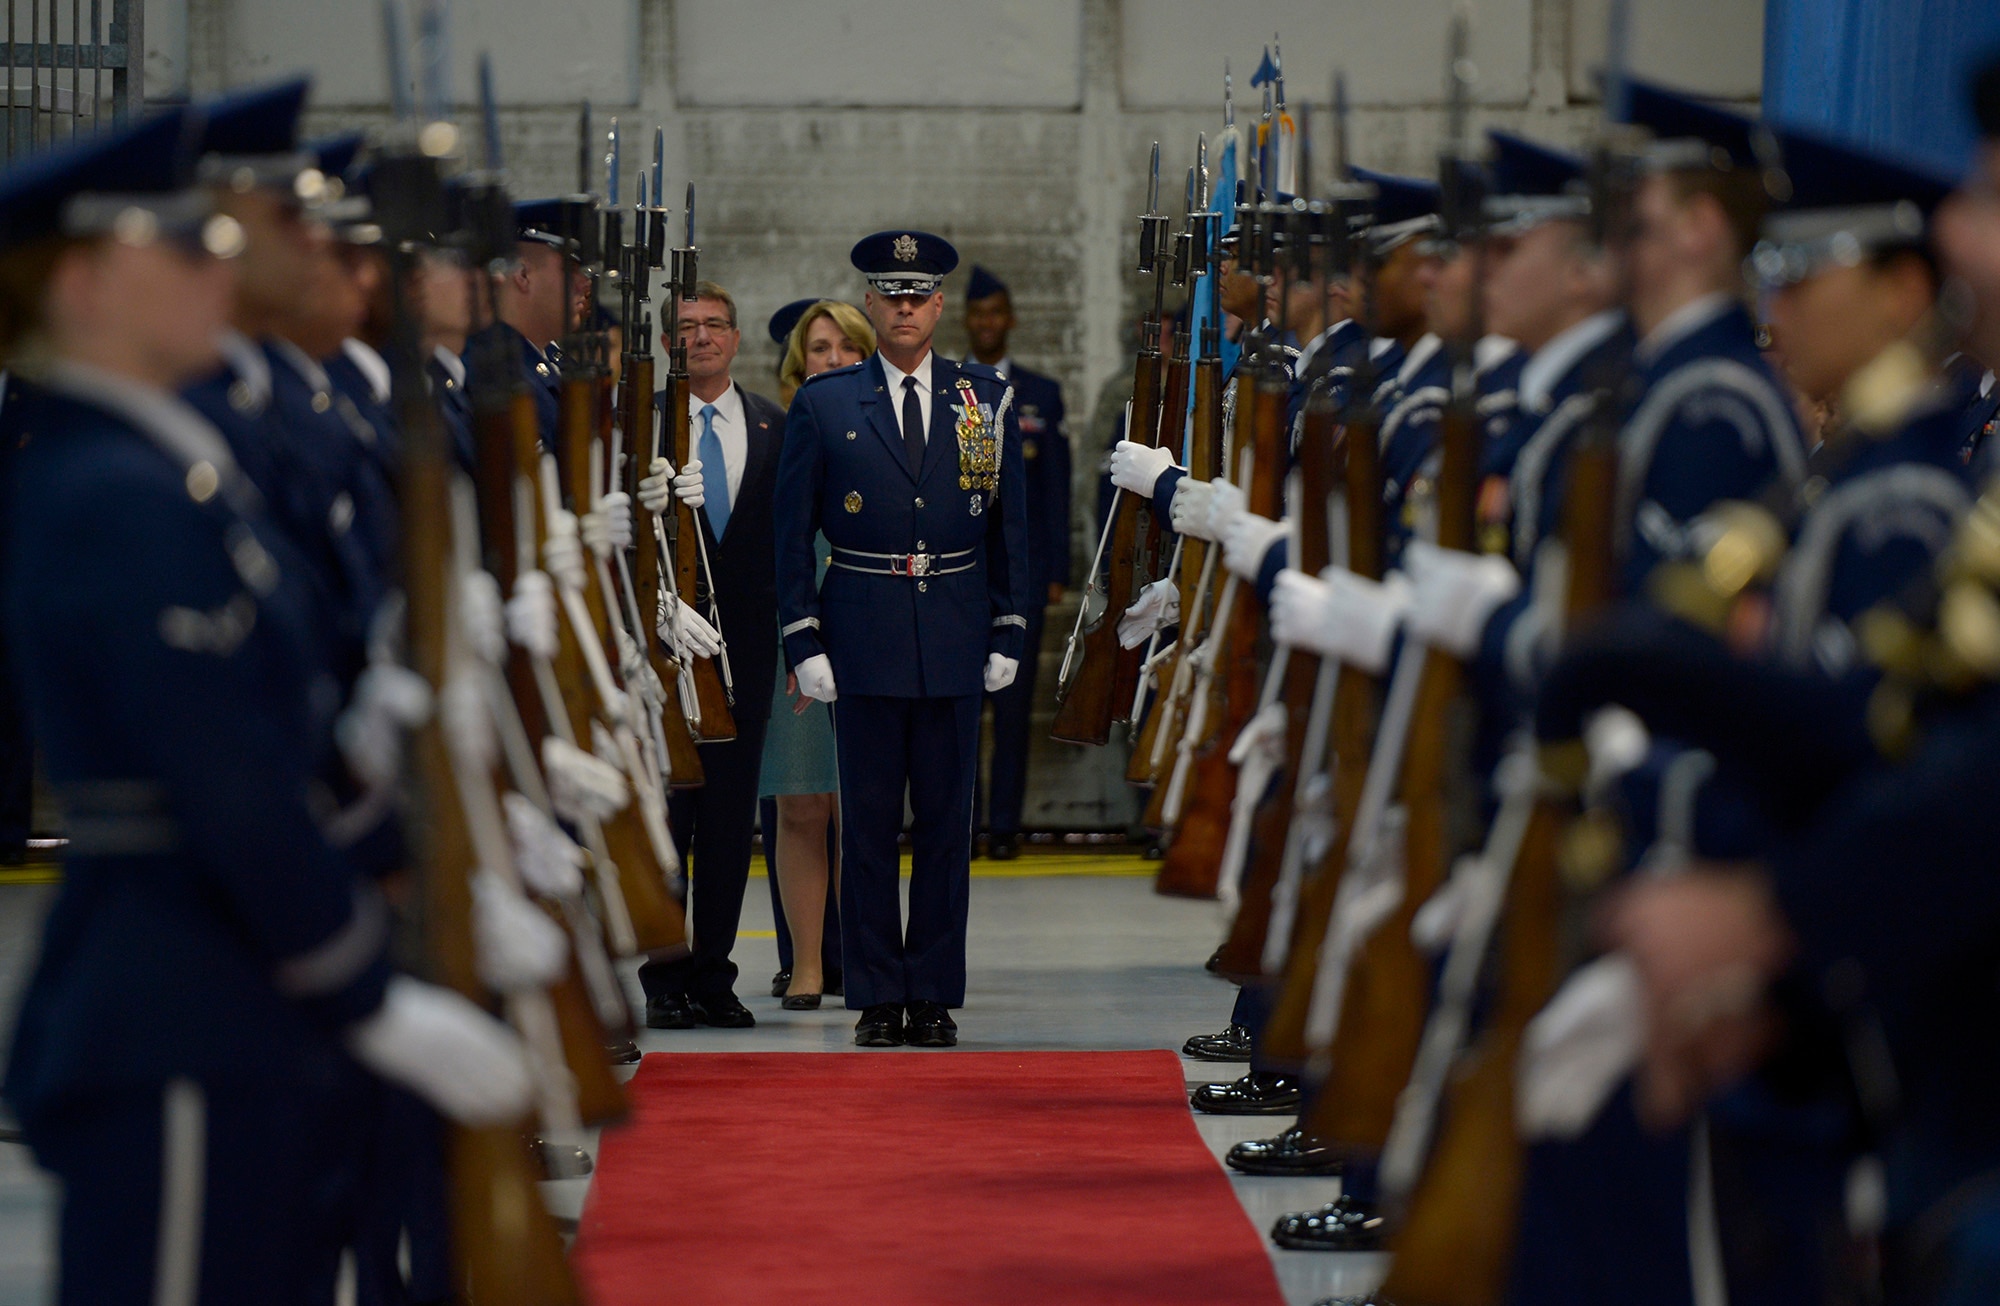 Lt. Col. Peter Tritsch, the U.S. Air Force Honor Guard commander, leads Secretary of the Air Force Deborah Lee James into her farewell ceremony at Joint Base Andrews, Md., Jan. 11, 2017.  James took office as the 23rd secretary of the Air Force in December 2013. (U.S. Air Force photo/Tech. Sgt. Joshua L. DeMotts) 